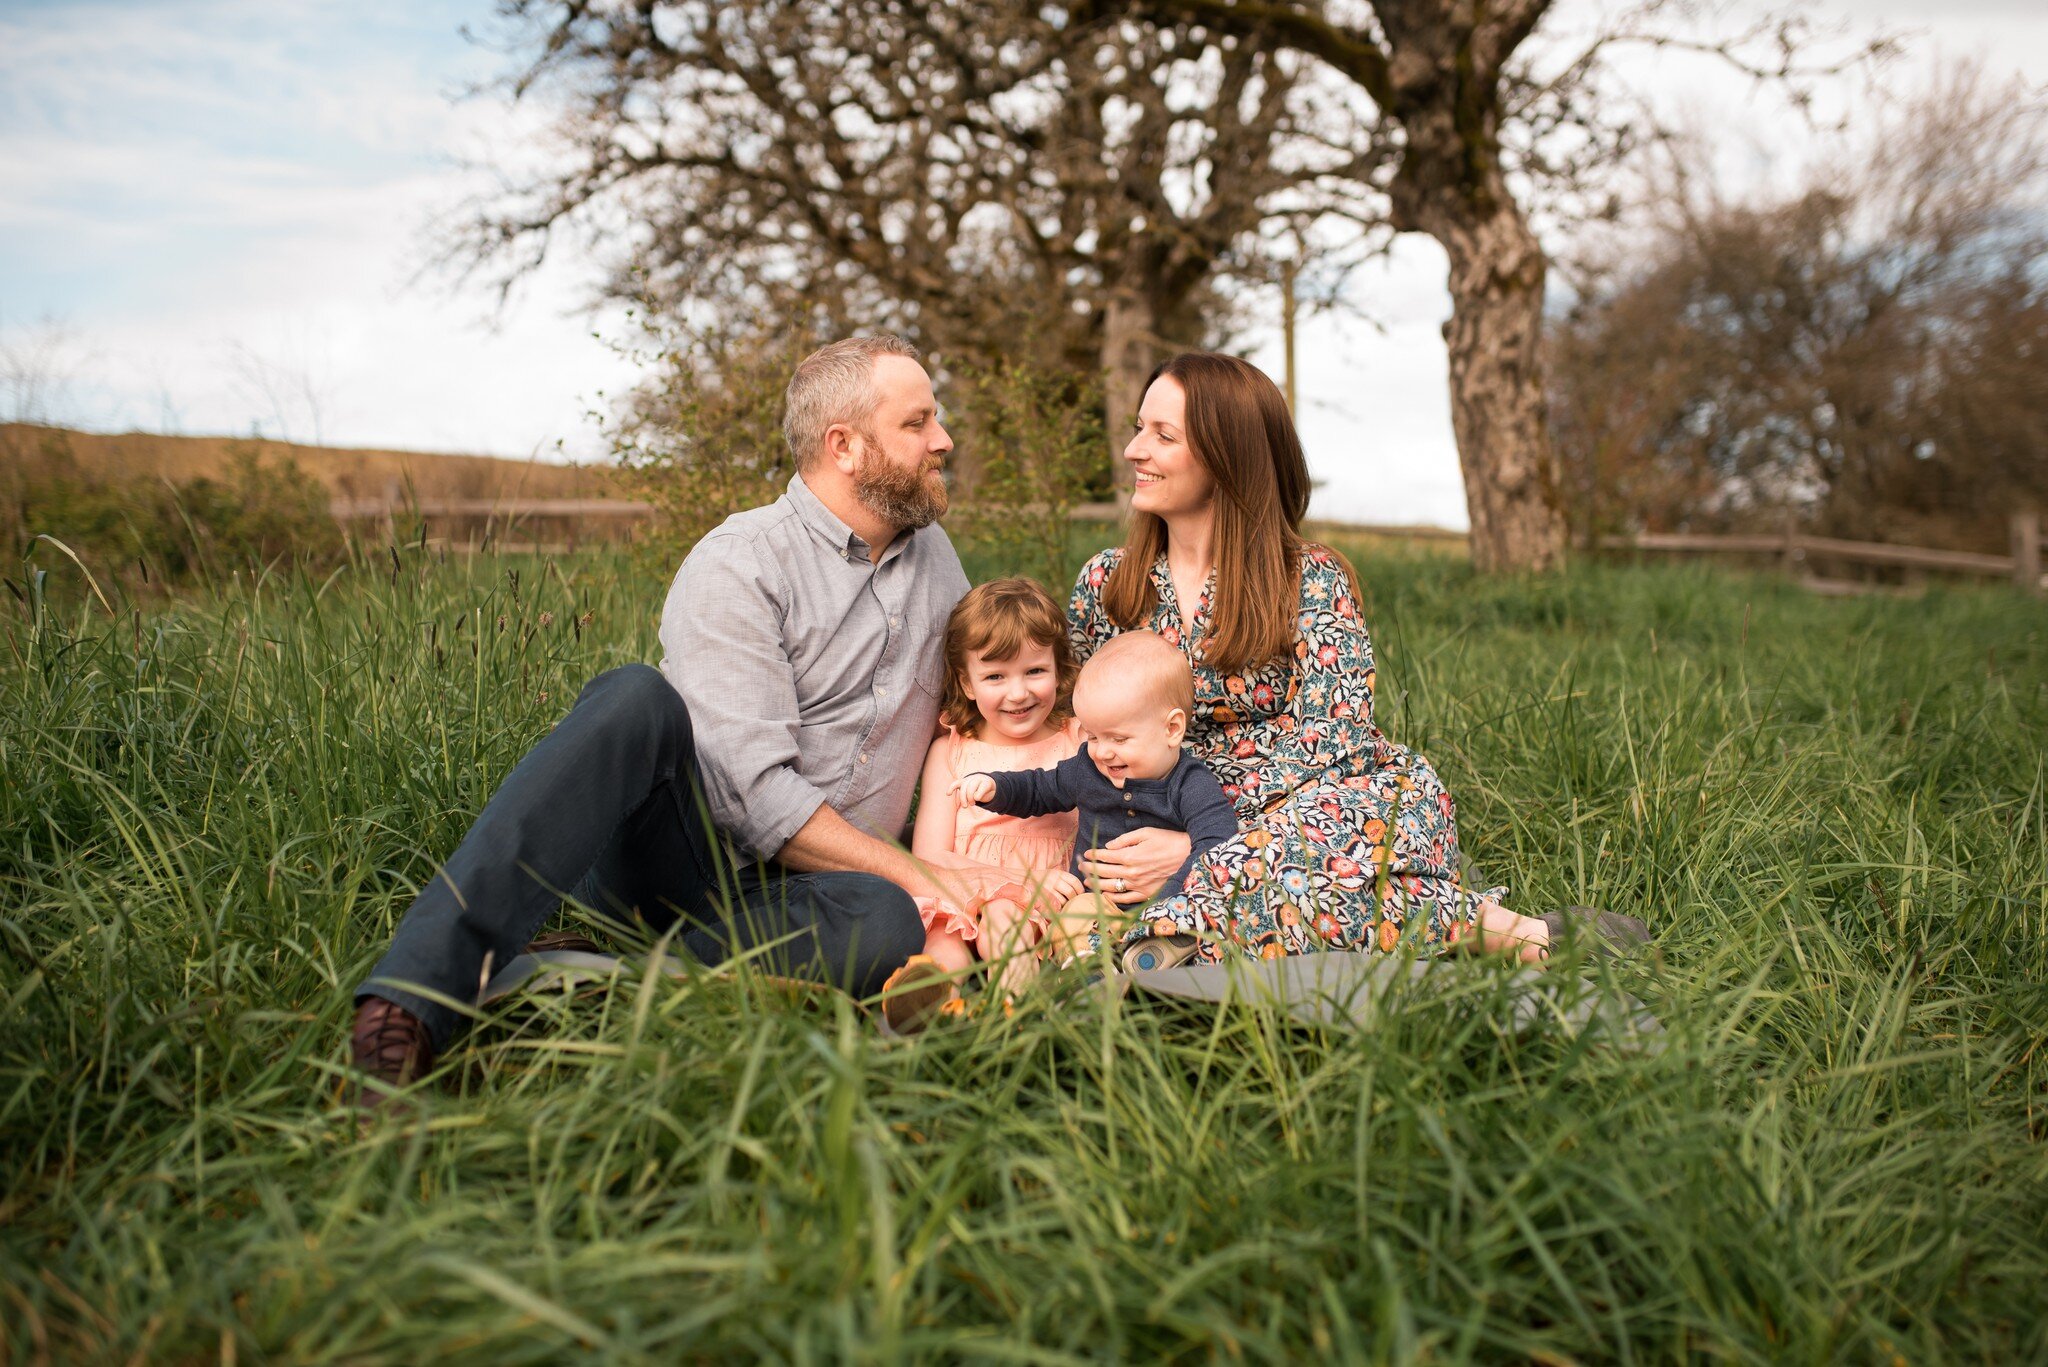 Embracing the beauty of spring in Vancouver, Washington with loved ones by our side. 🌳💖 There's something truly magical about the arrival of spring, and it's even more special when shared with family. Picture-perfect moments like this, where laught